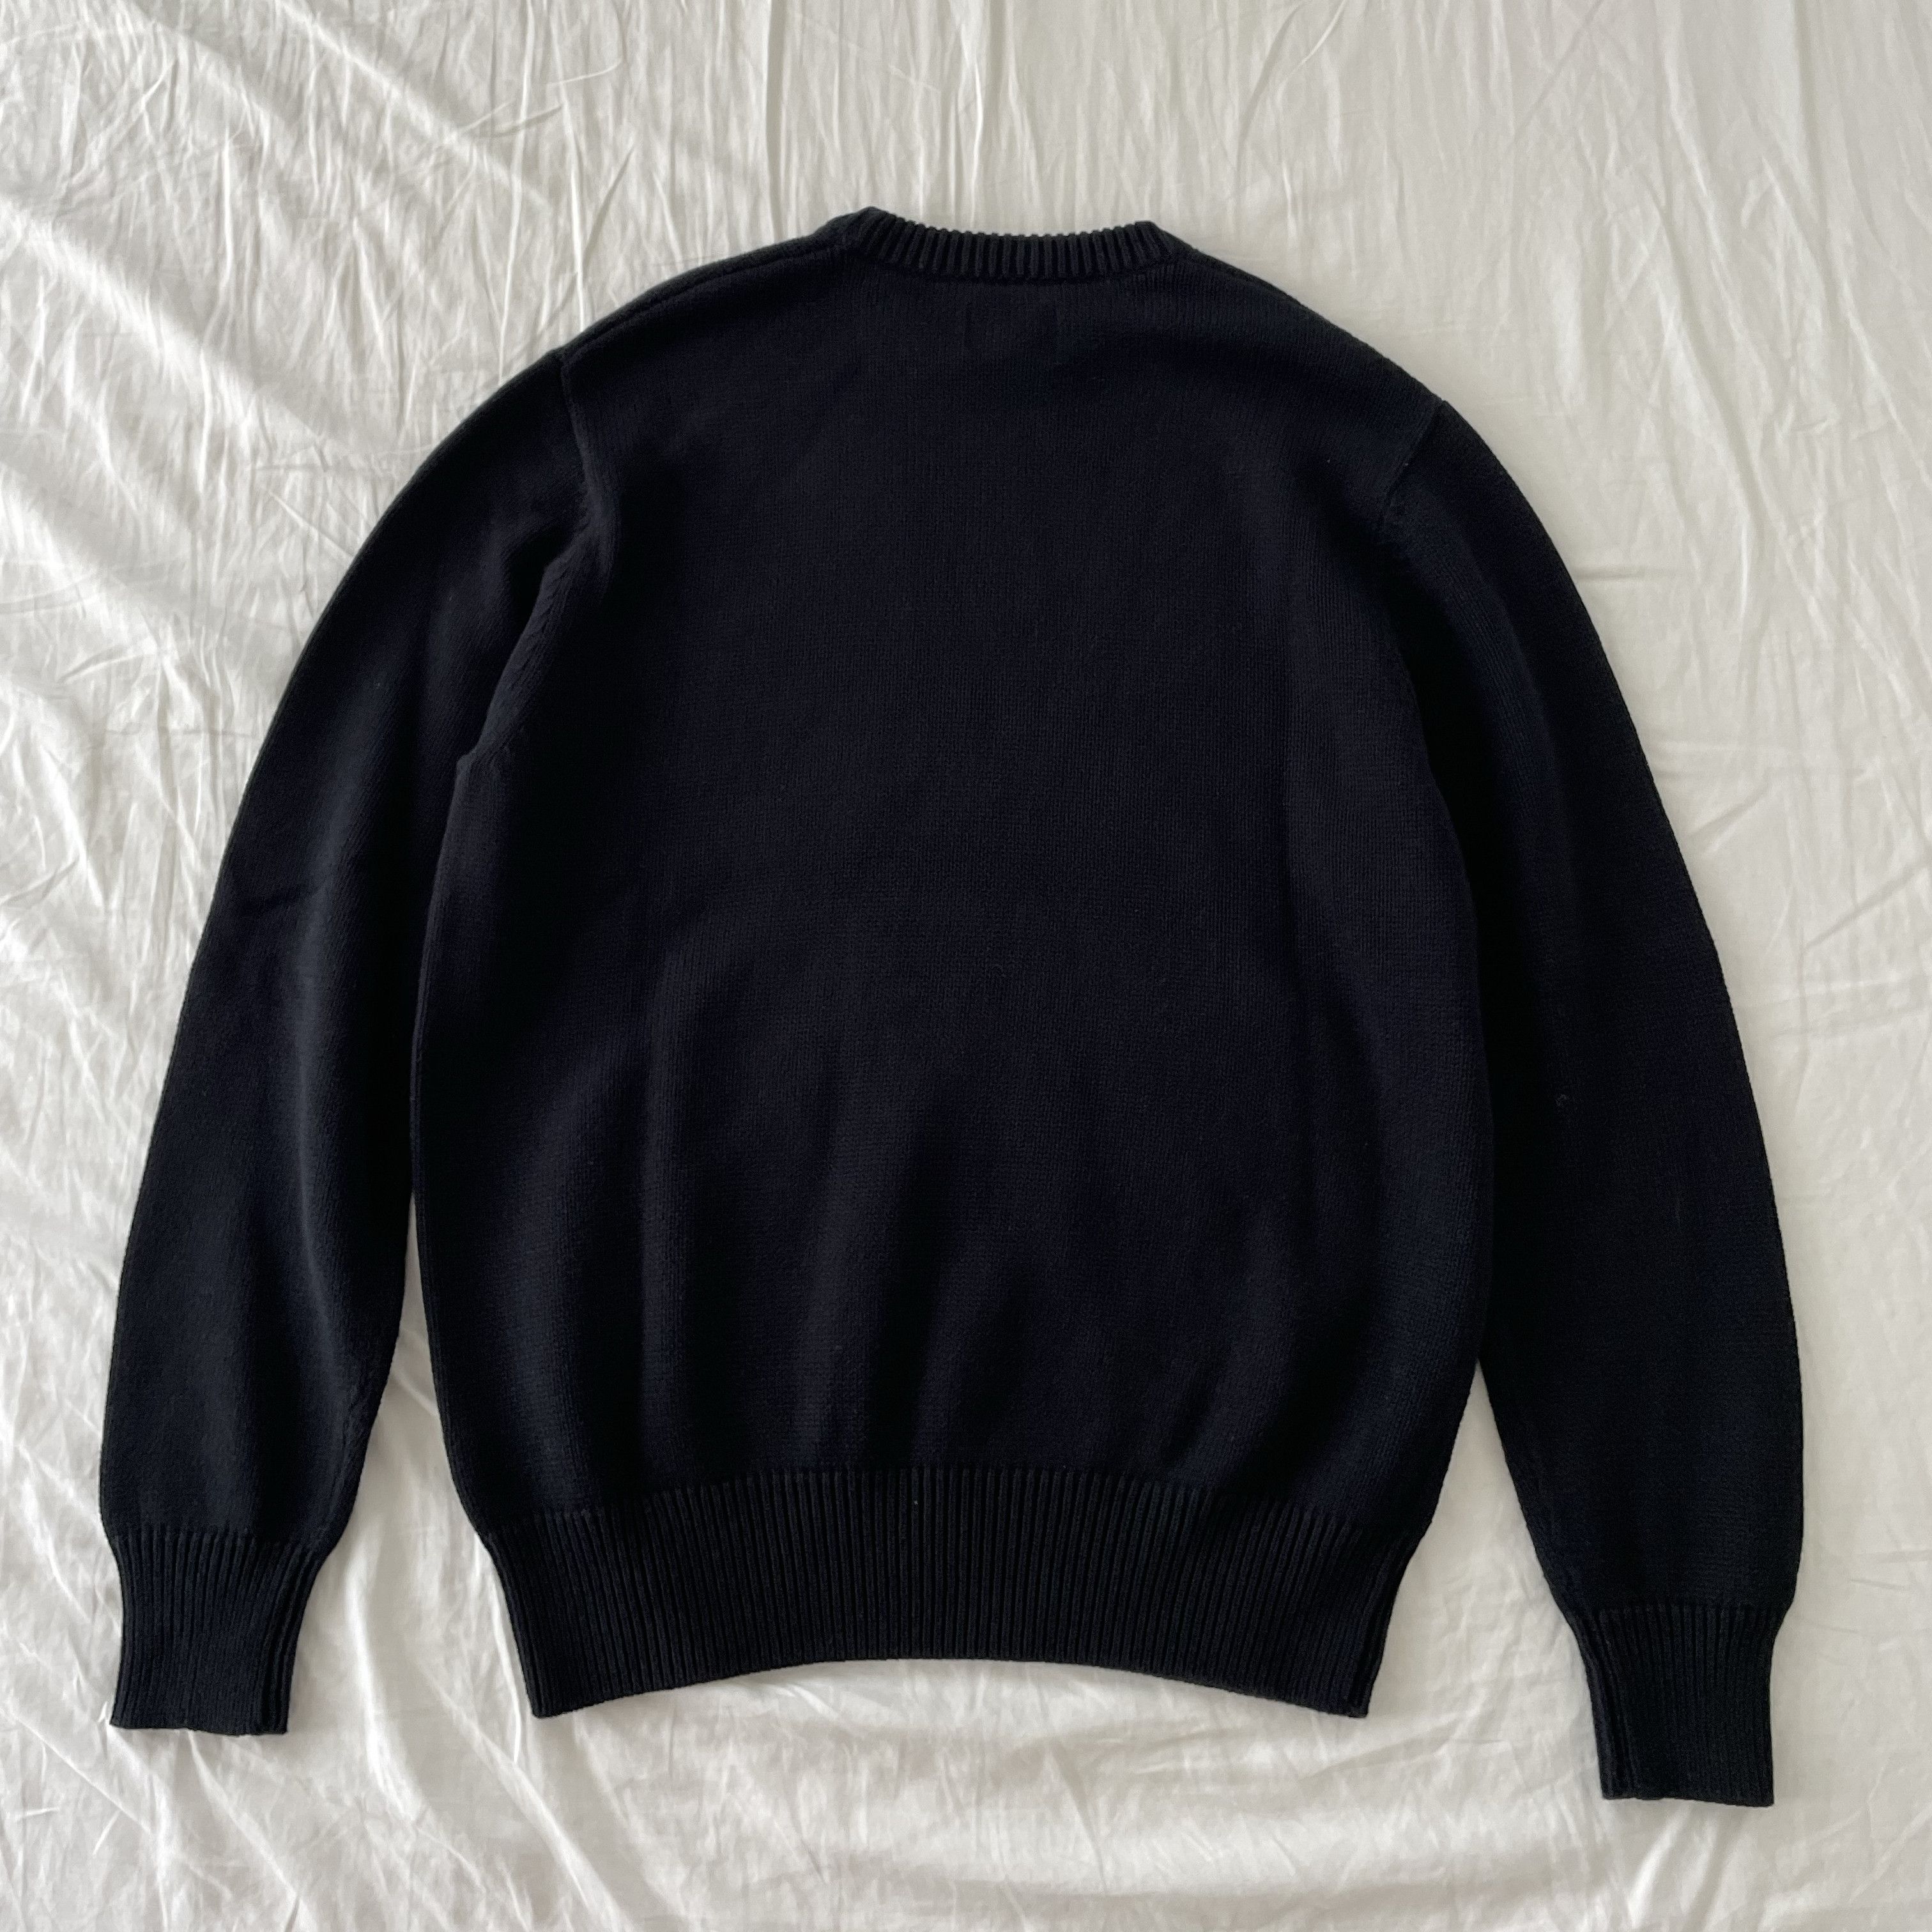 Stussy Curly S knit | Grailed